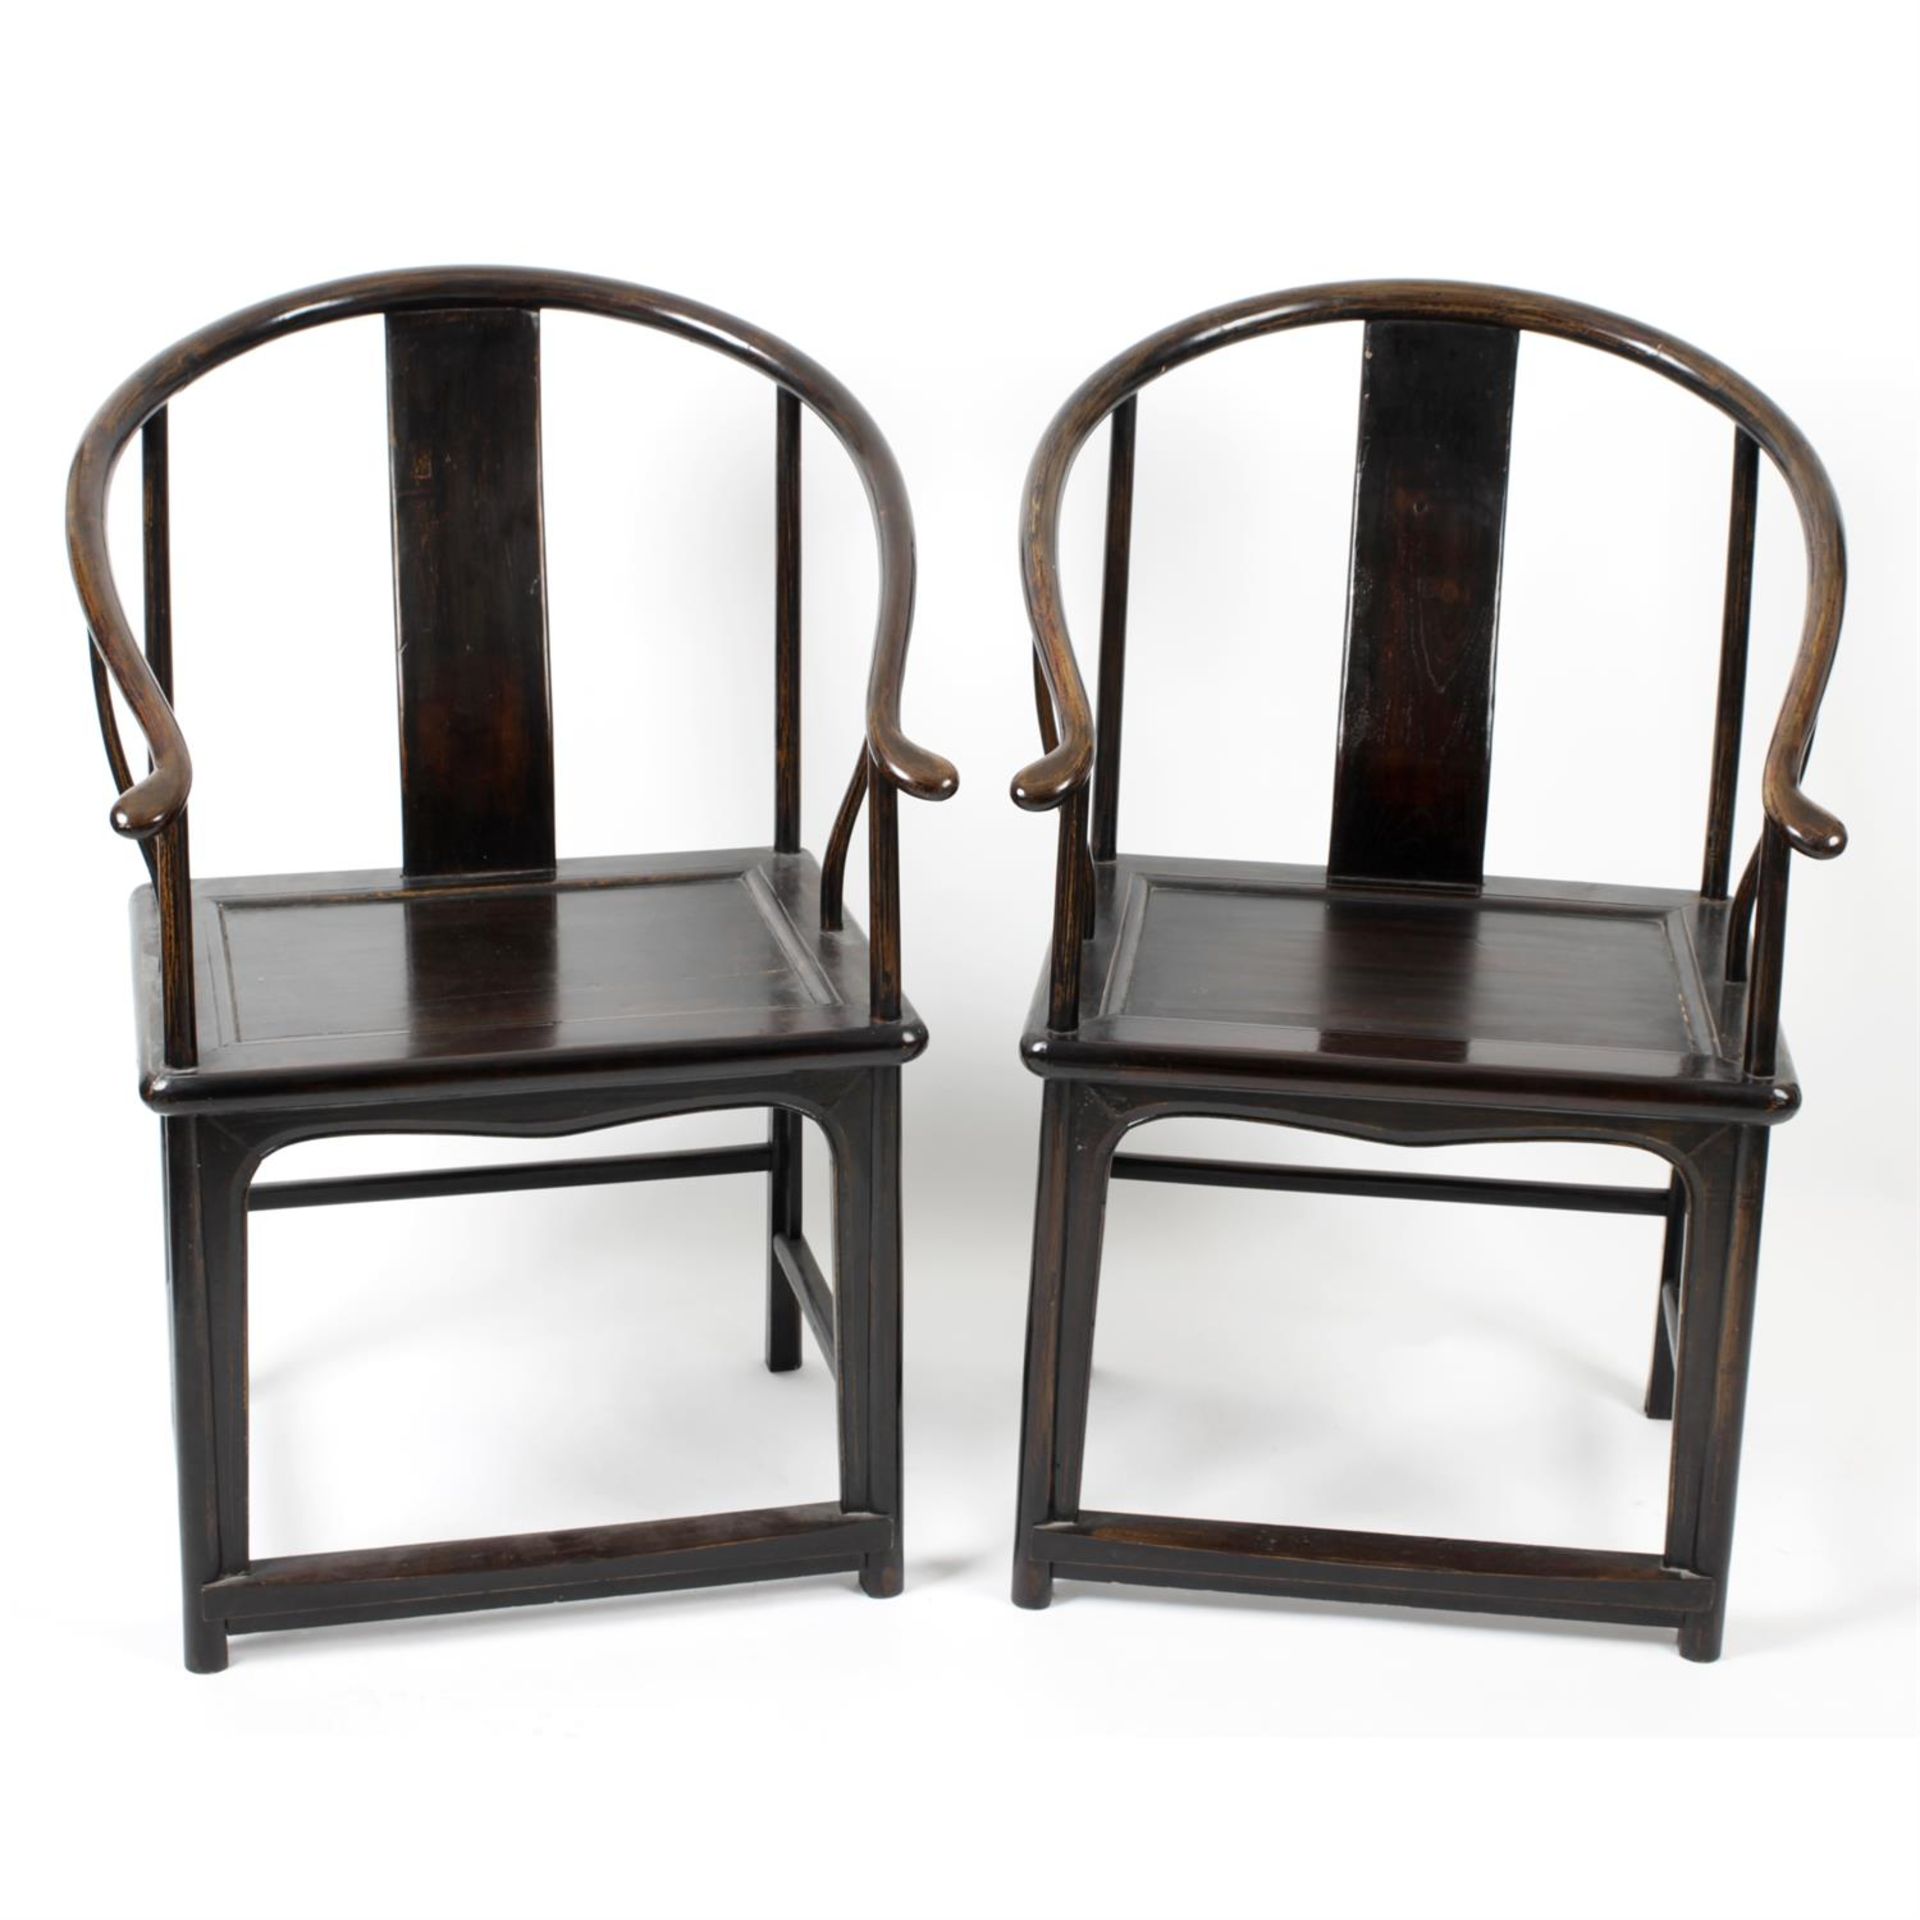 A pair of Chinese stained wooden framed 'horse shoe' chairs.